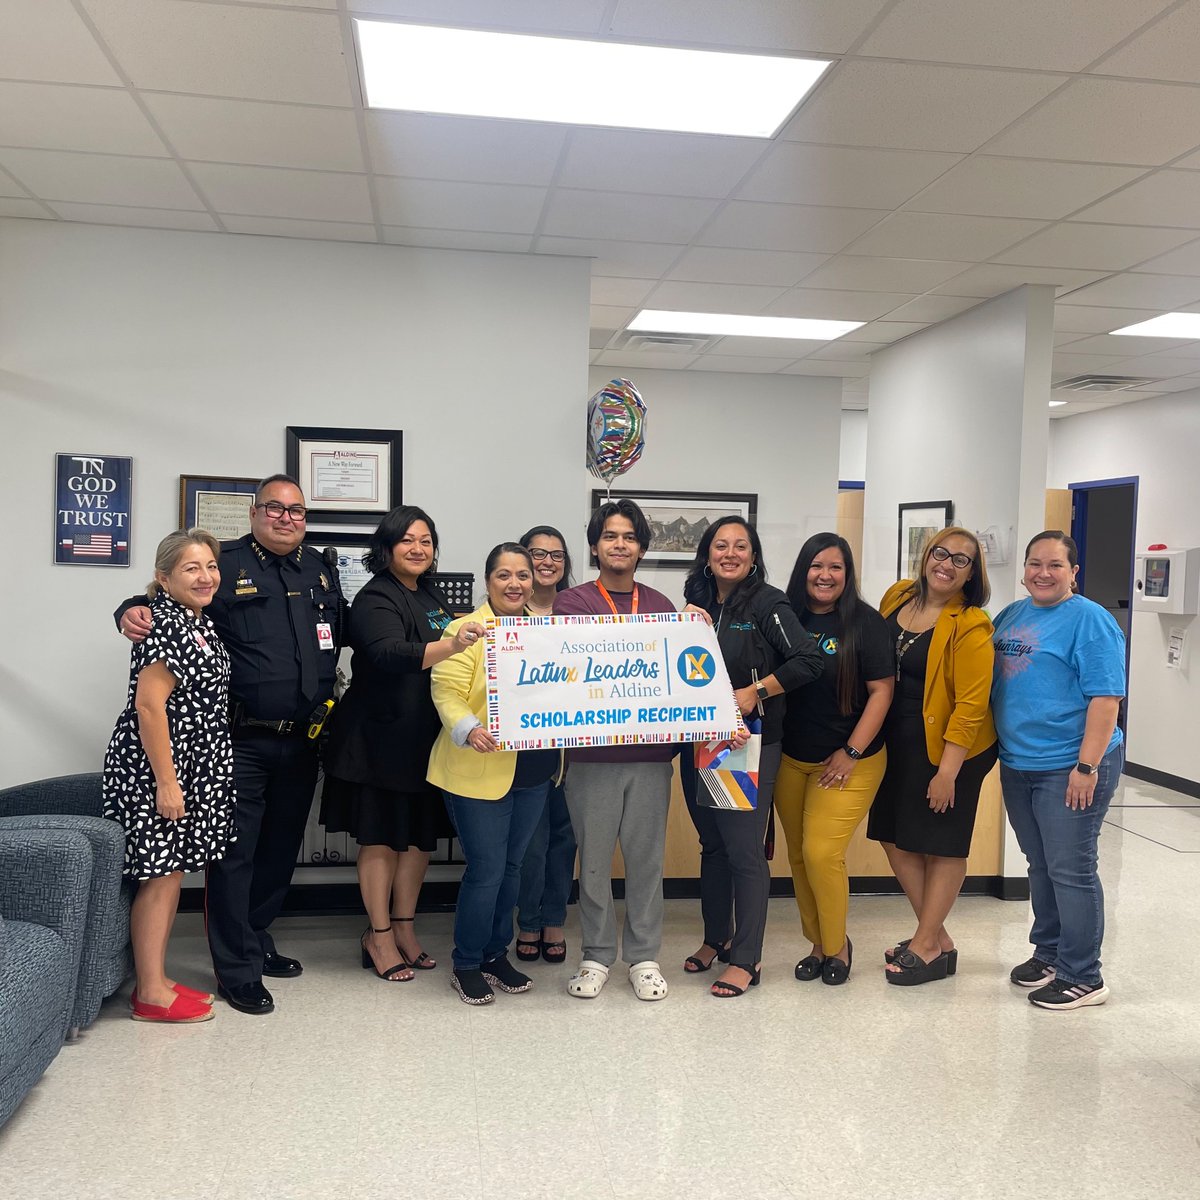 ¡Felicidades! Shout out to our @ALL_in_Aldine Scholarship winners!!!! We are so proud of you! Thank you to all our members who make these scholarship opportunities possible. 🌟